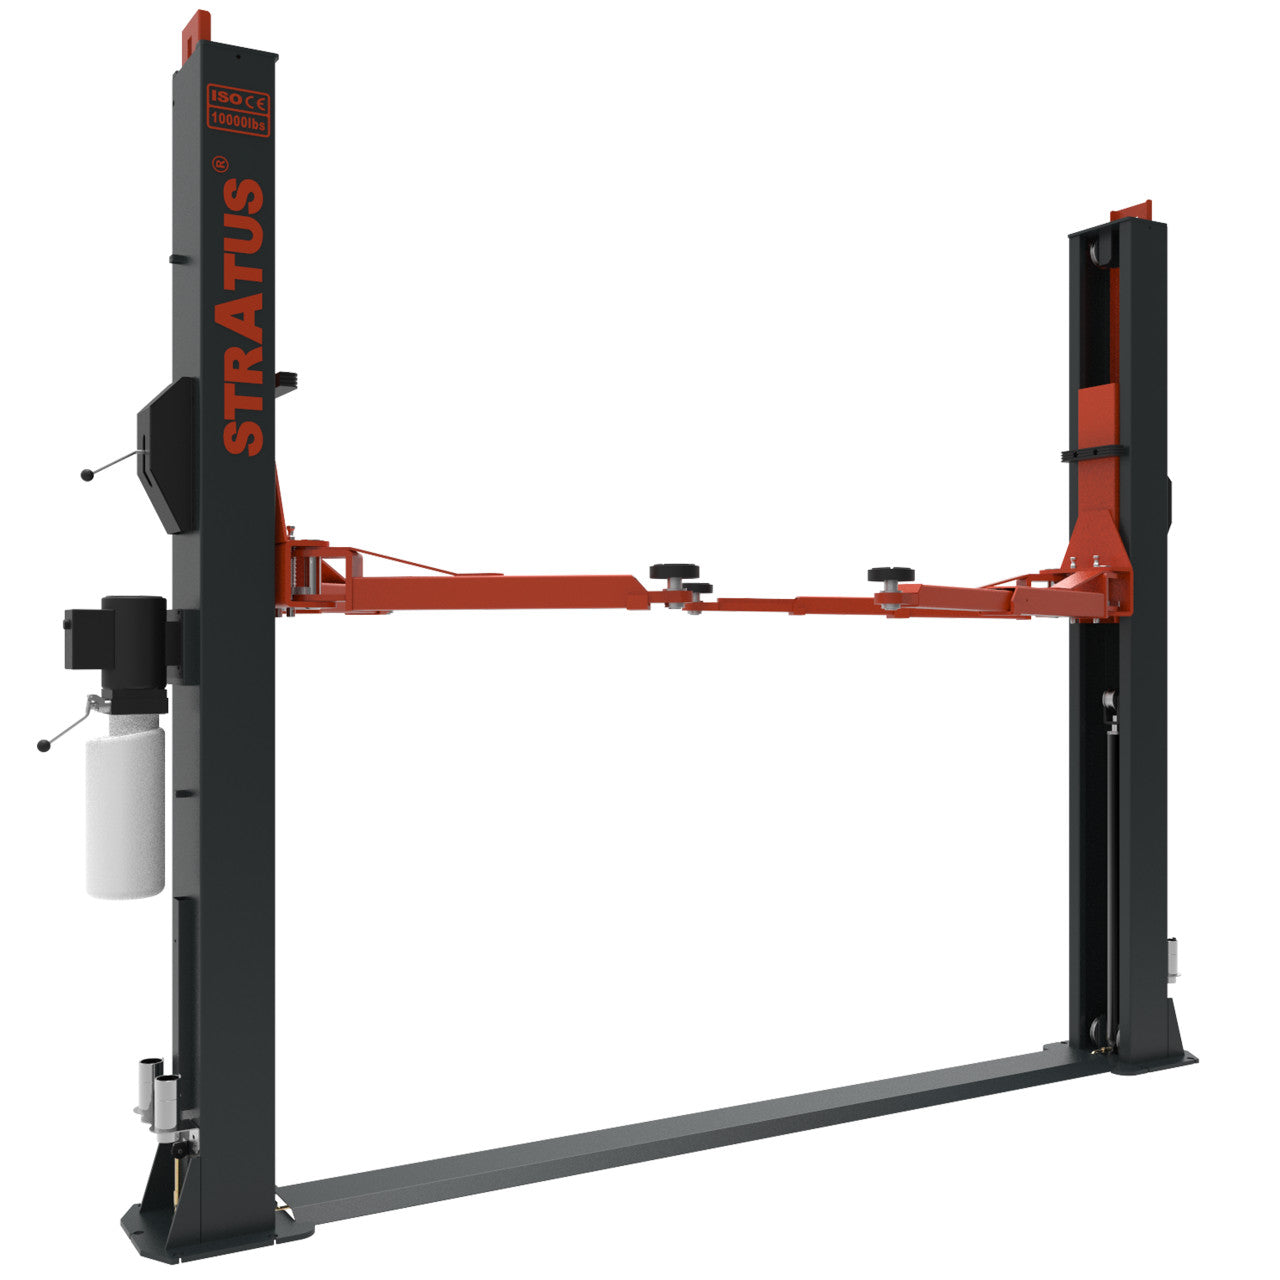 Stratus Floor Plate Open Top 10,000 LBS Capacity Single Point Manual Release Car Lift SAE-F10S